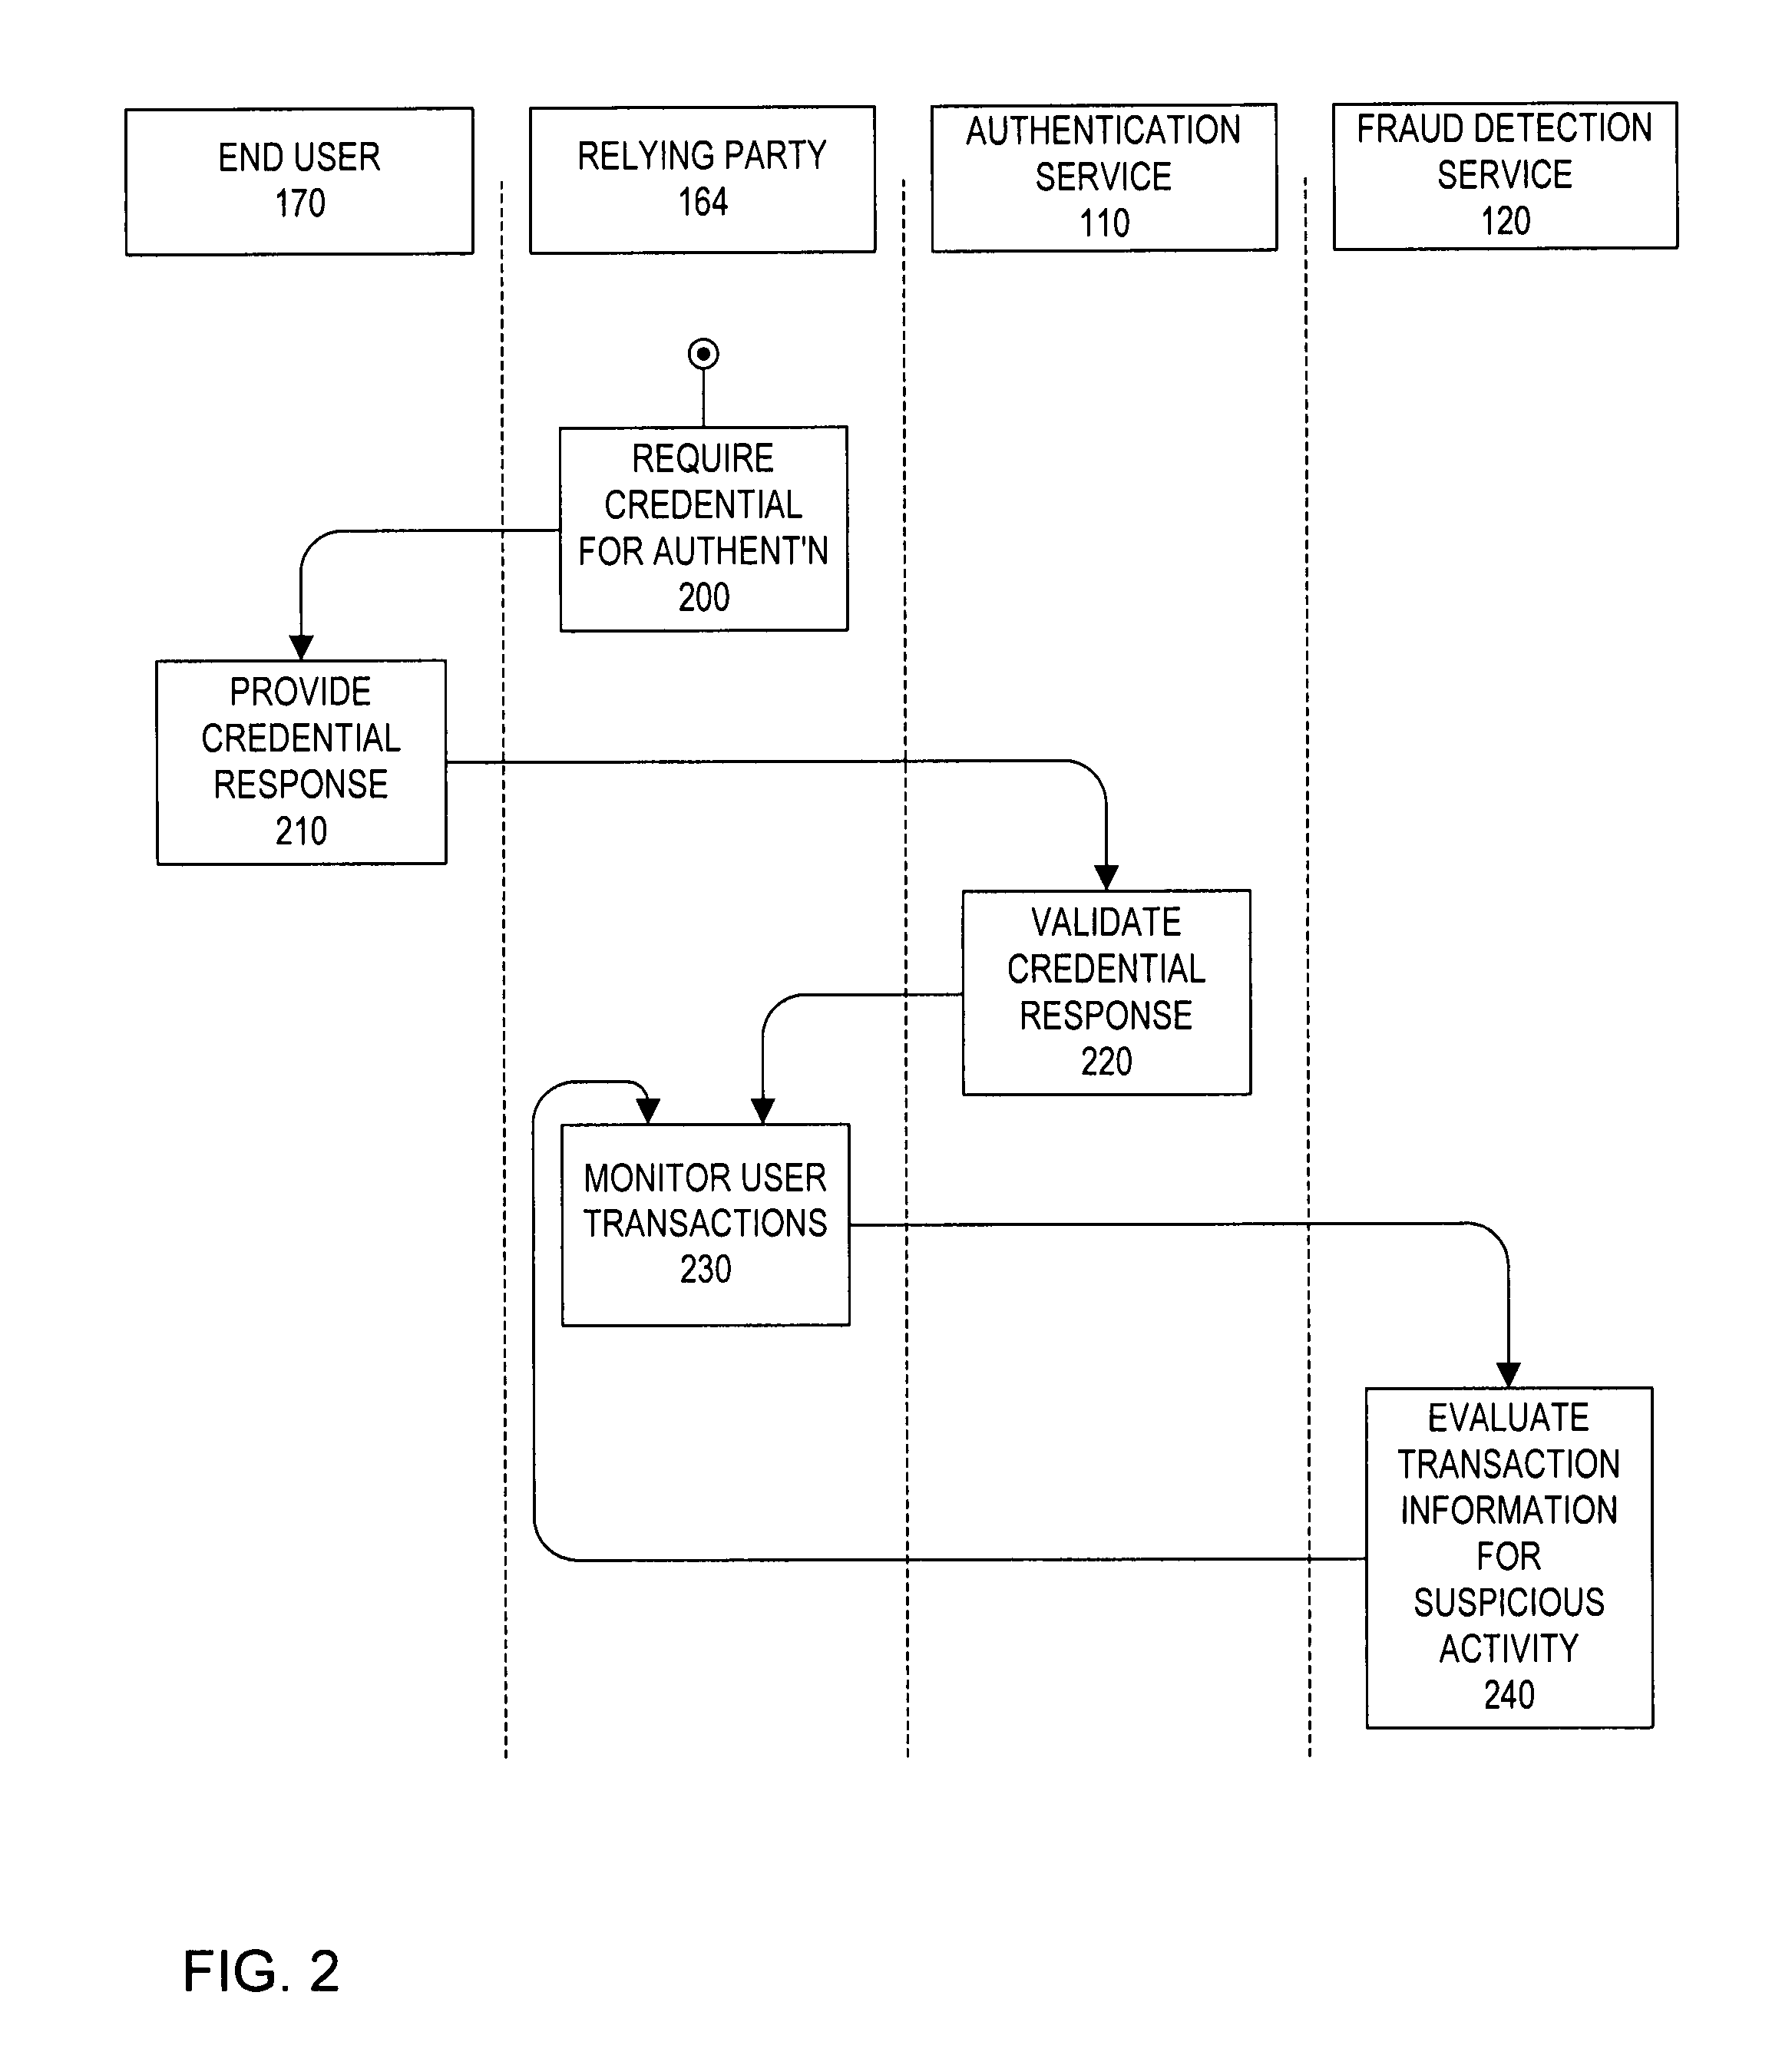 System and method for network-based fraud and authentication services